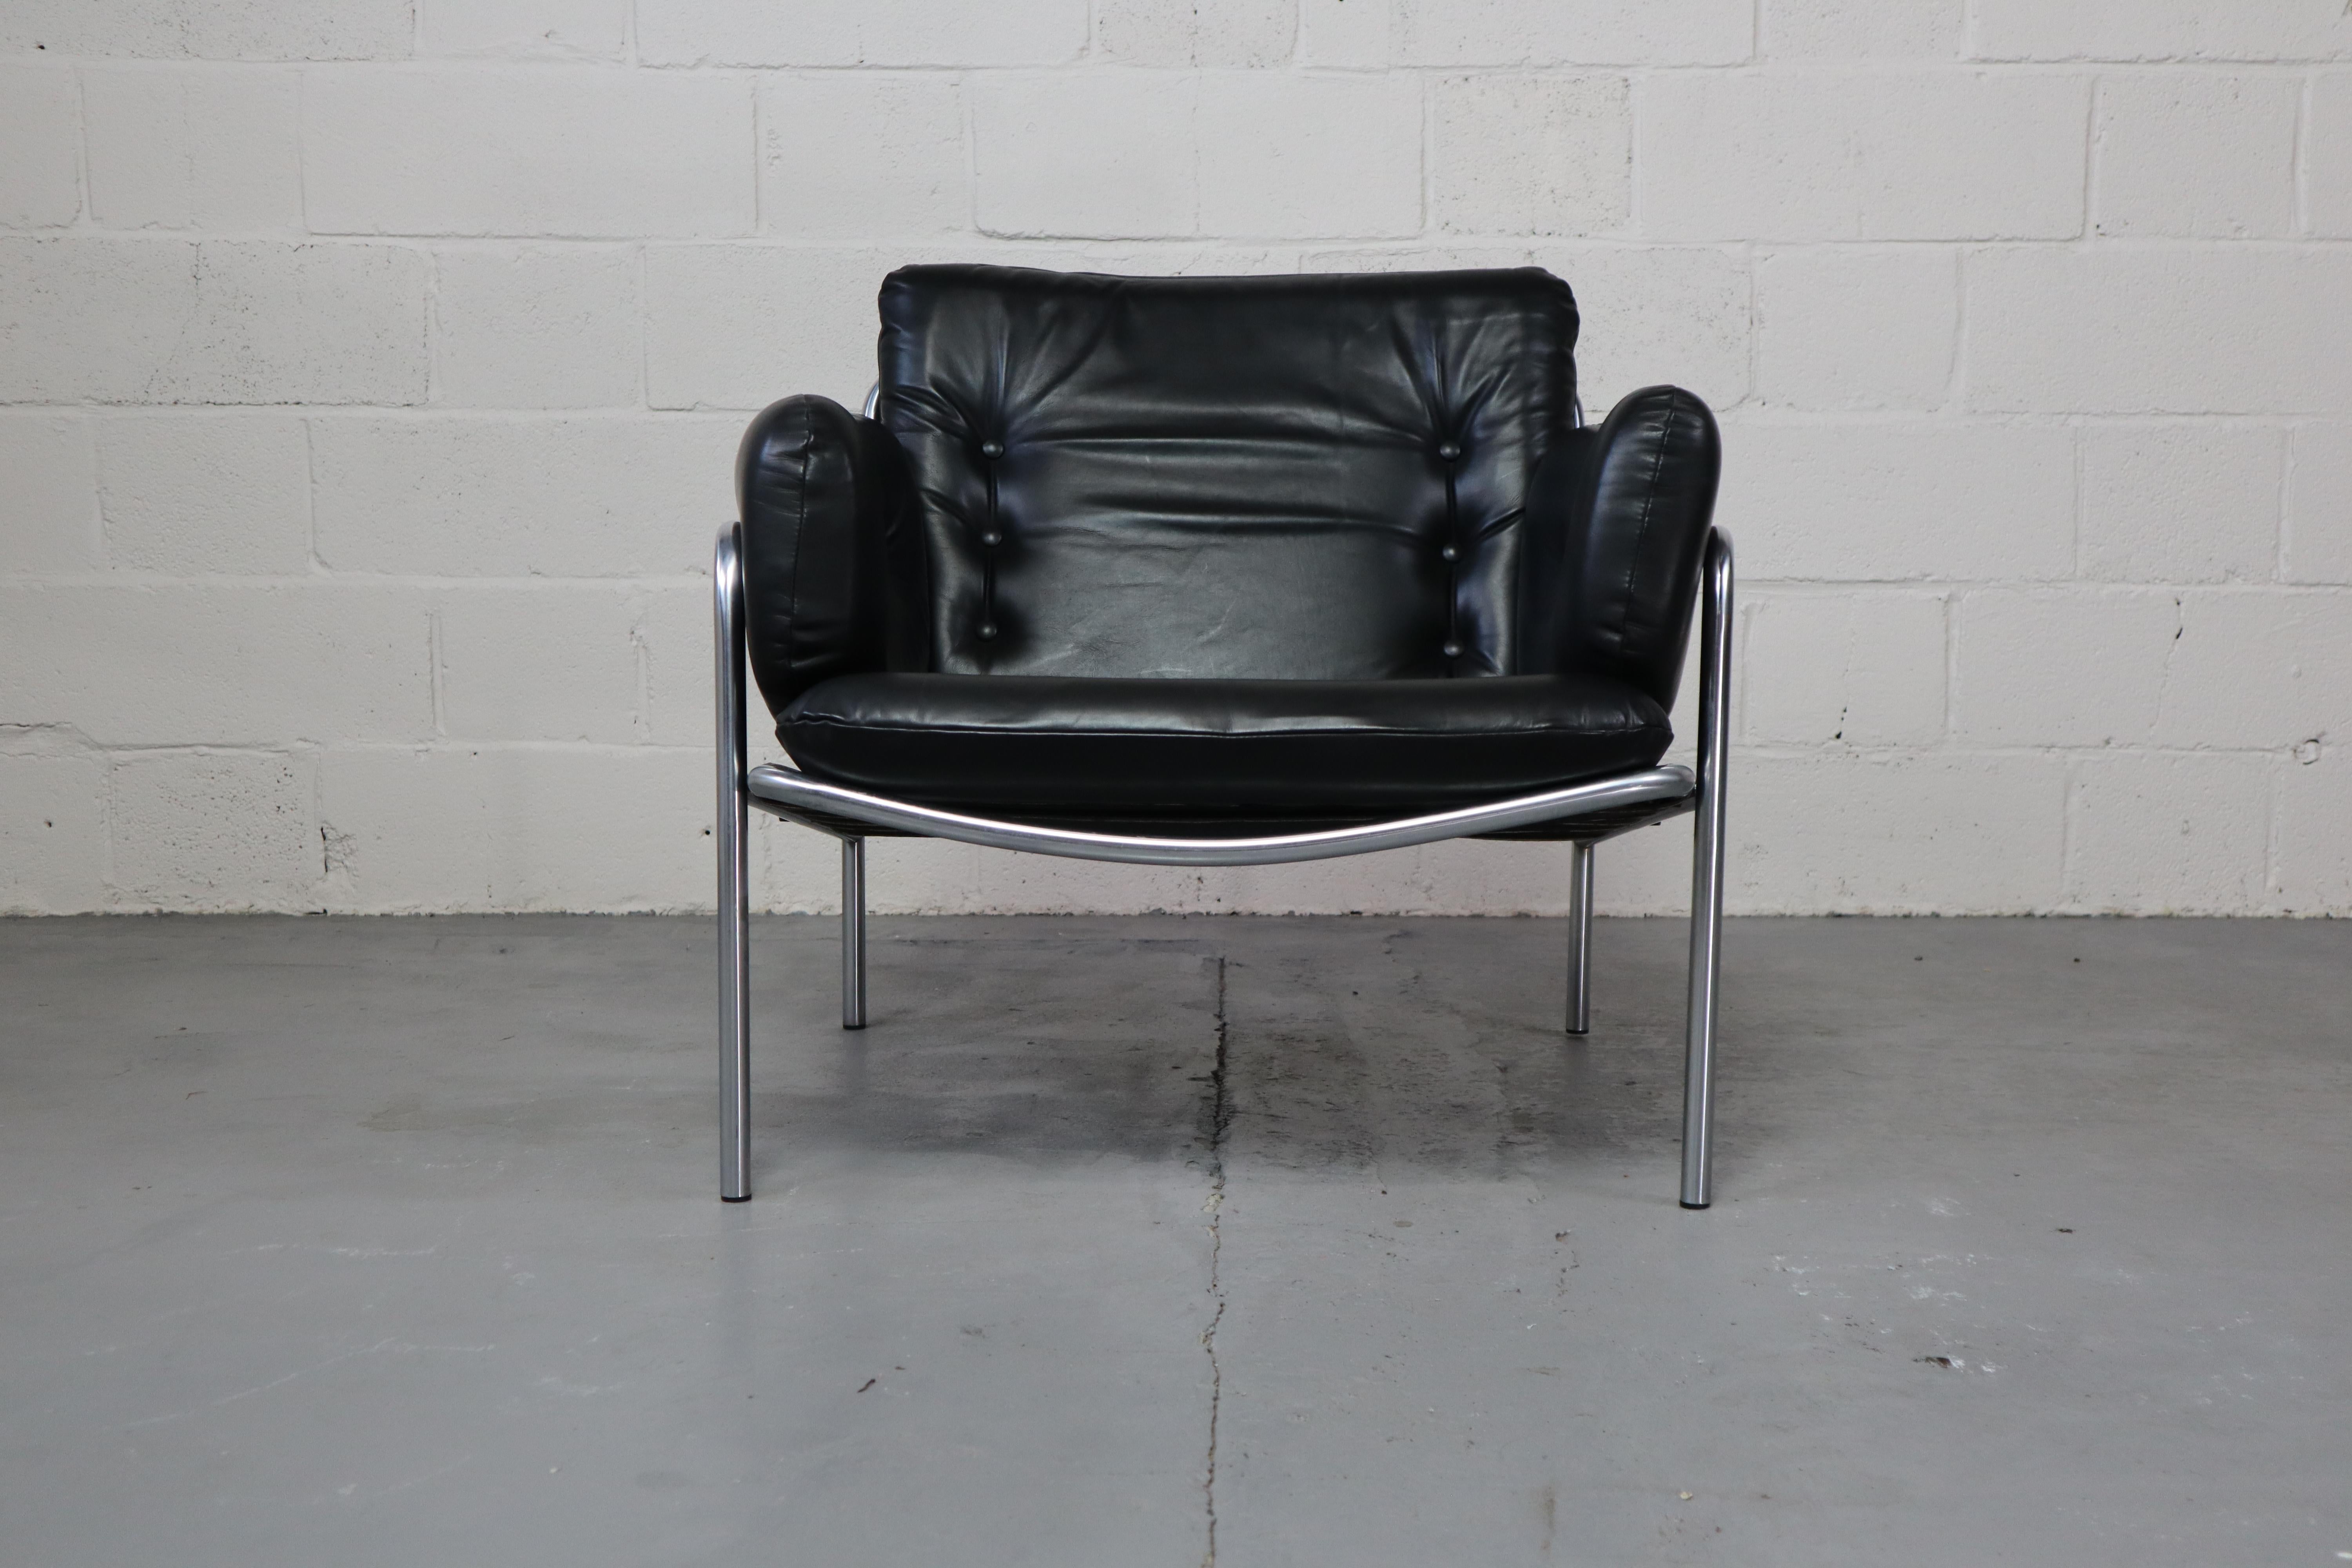 Osaka SZ08 black leather lounge chair by Martin Visser for 't Spectrum Netherlands. It was designed for the Osaka series in 1969 for the Dutch pavilion at the World Expo in Osaka, Japan.
Manufactured by 't Spectrum between 1969 and 1974.

